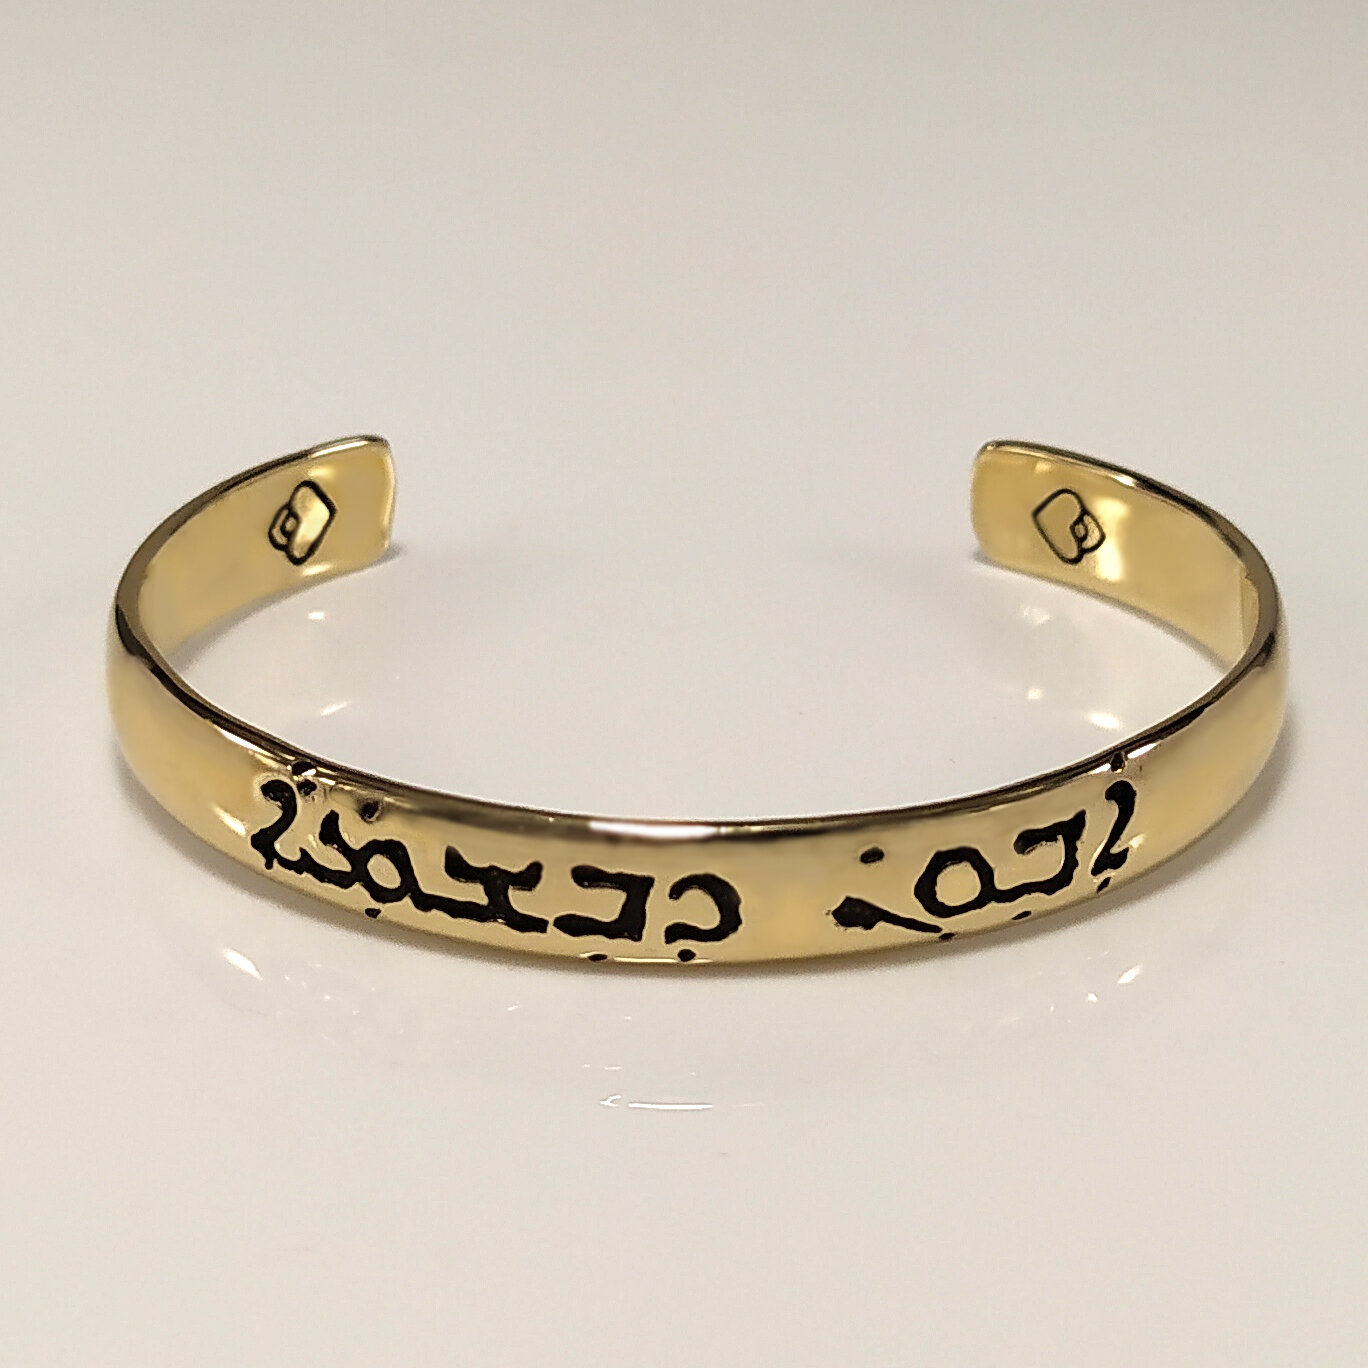 Handmade Personalised Gold Plated Name Bracelet With ANY NAME of Your  Choice in ARABIC Calligraphy - Etsy